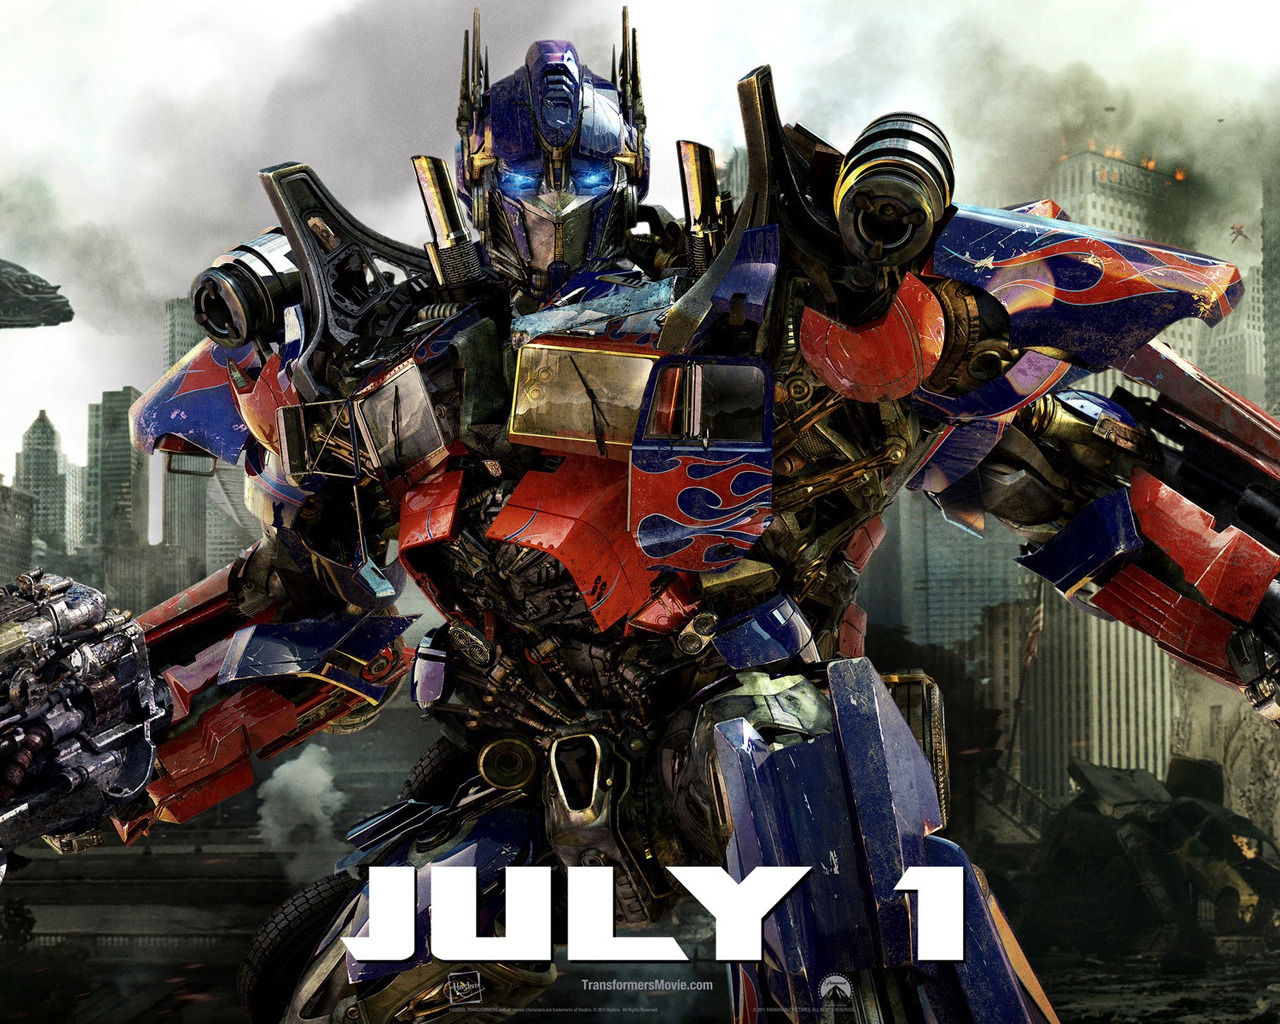 Transformers 3 Dark of the Moon for 1280 x 1024 resolution